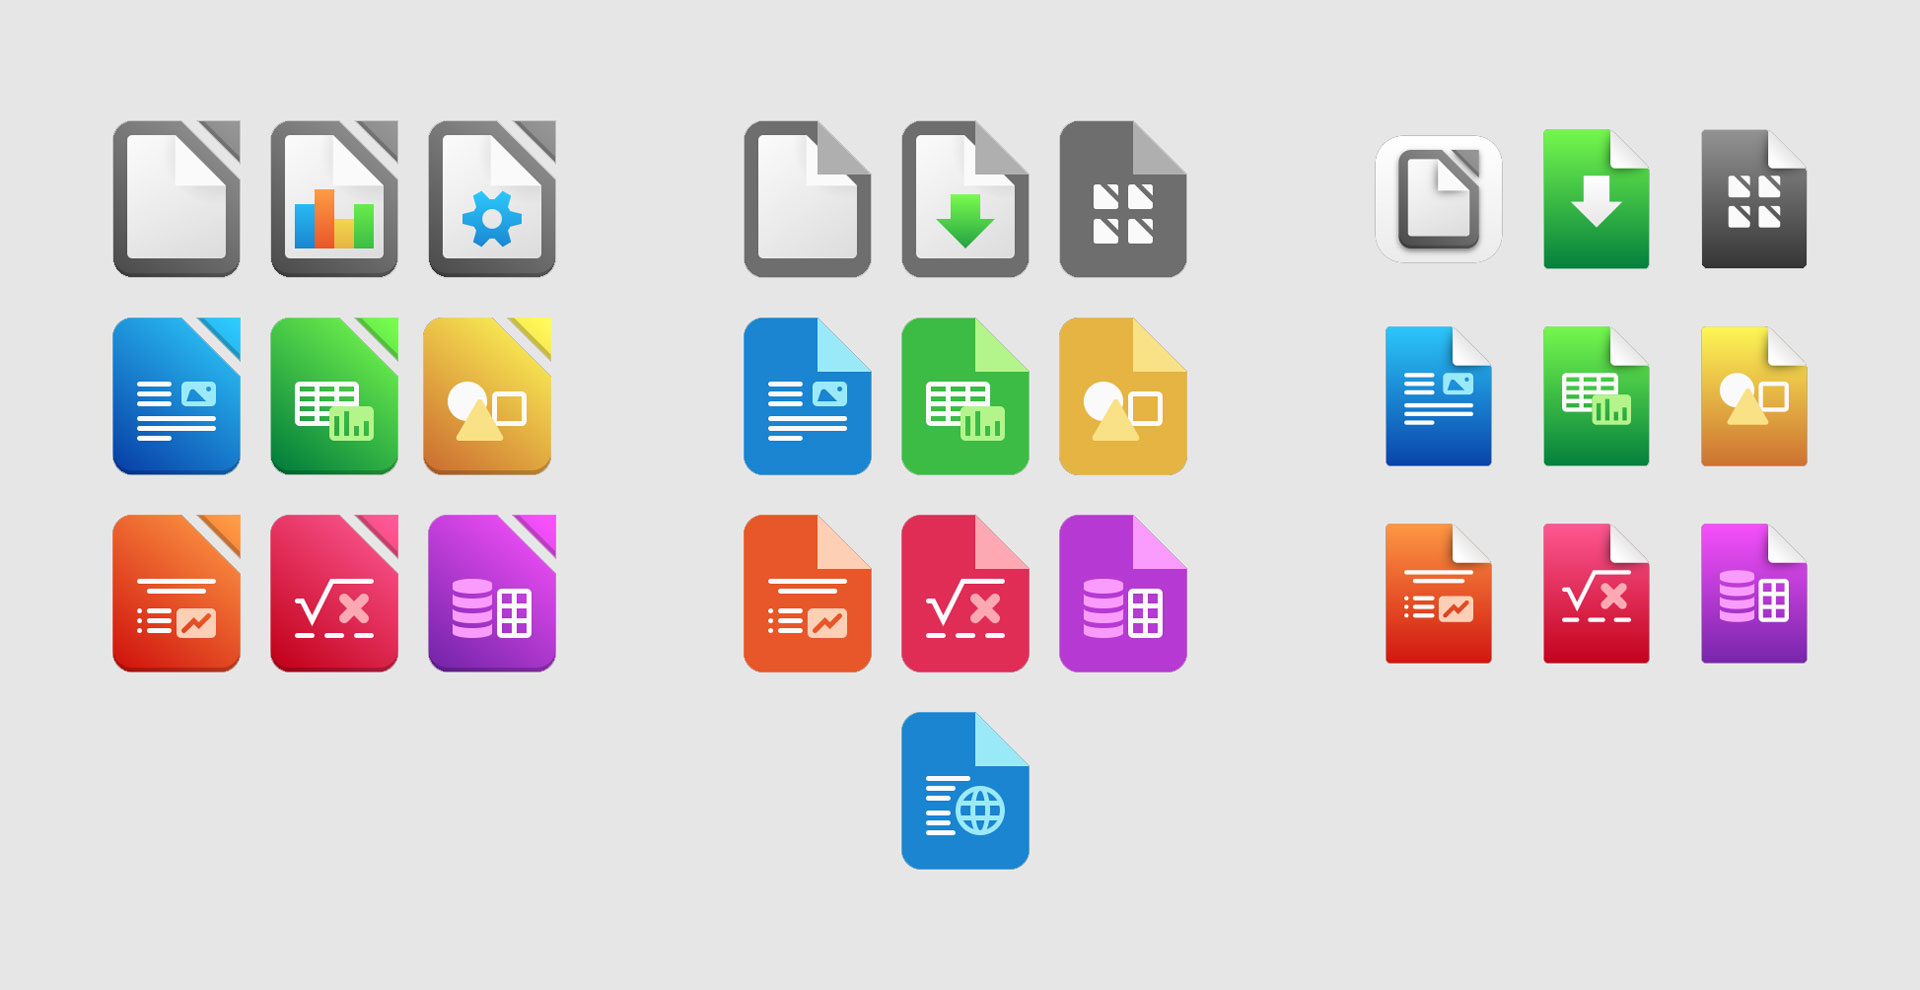 libreoffice 7.5 has new icons, this what they look like.